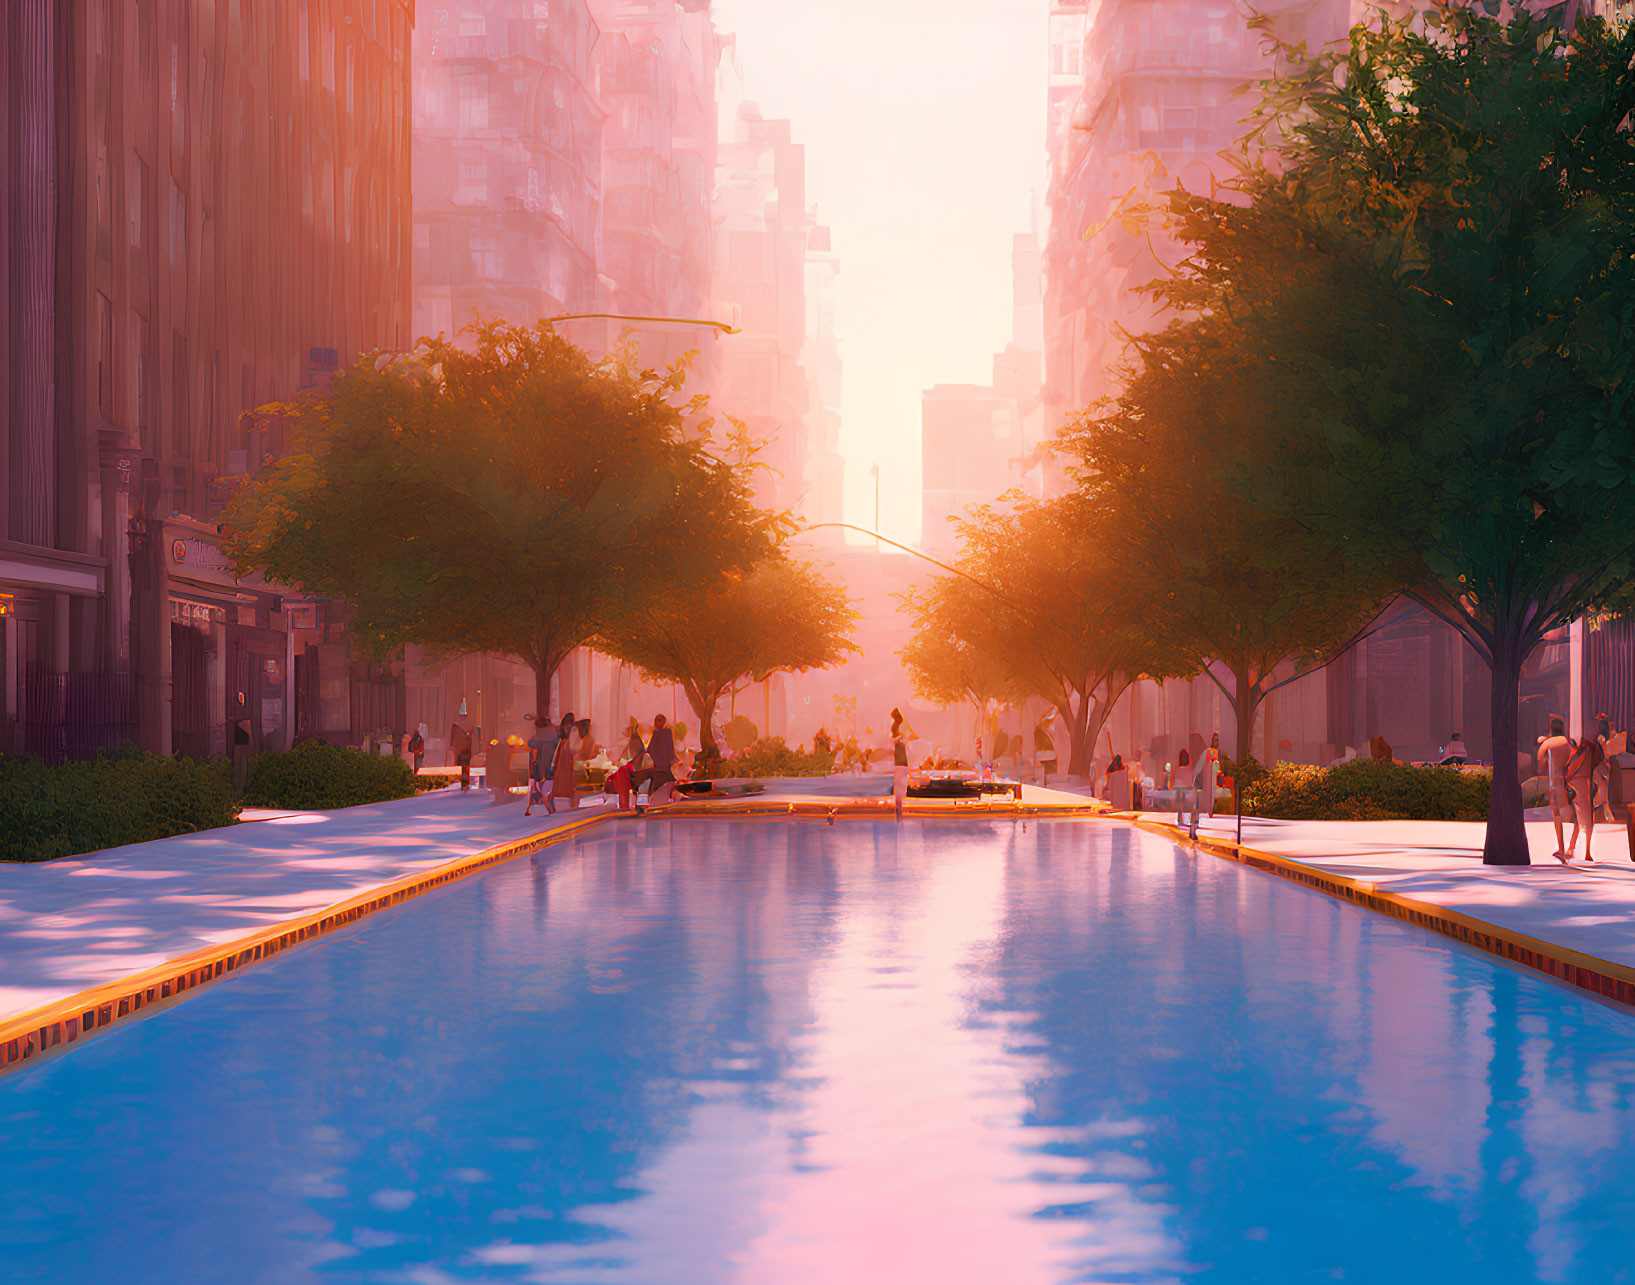 Cityscape at Sunset: People Walking Along Tree-Lined Paths Beside Reflective Water Feature